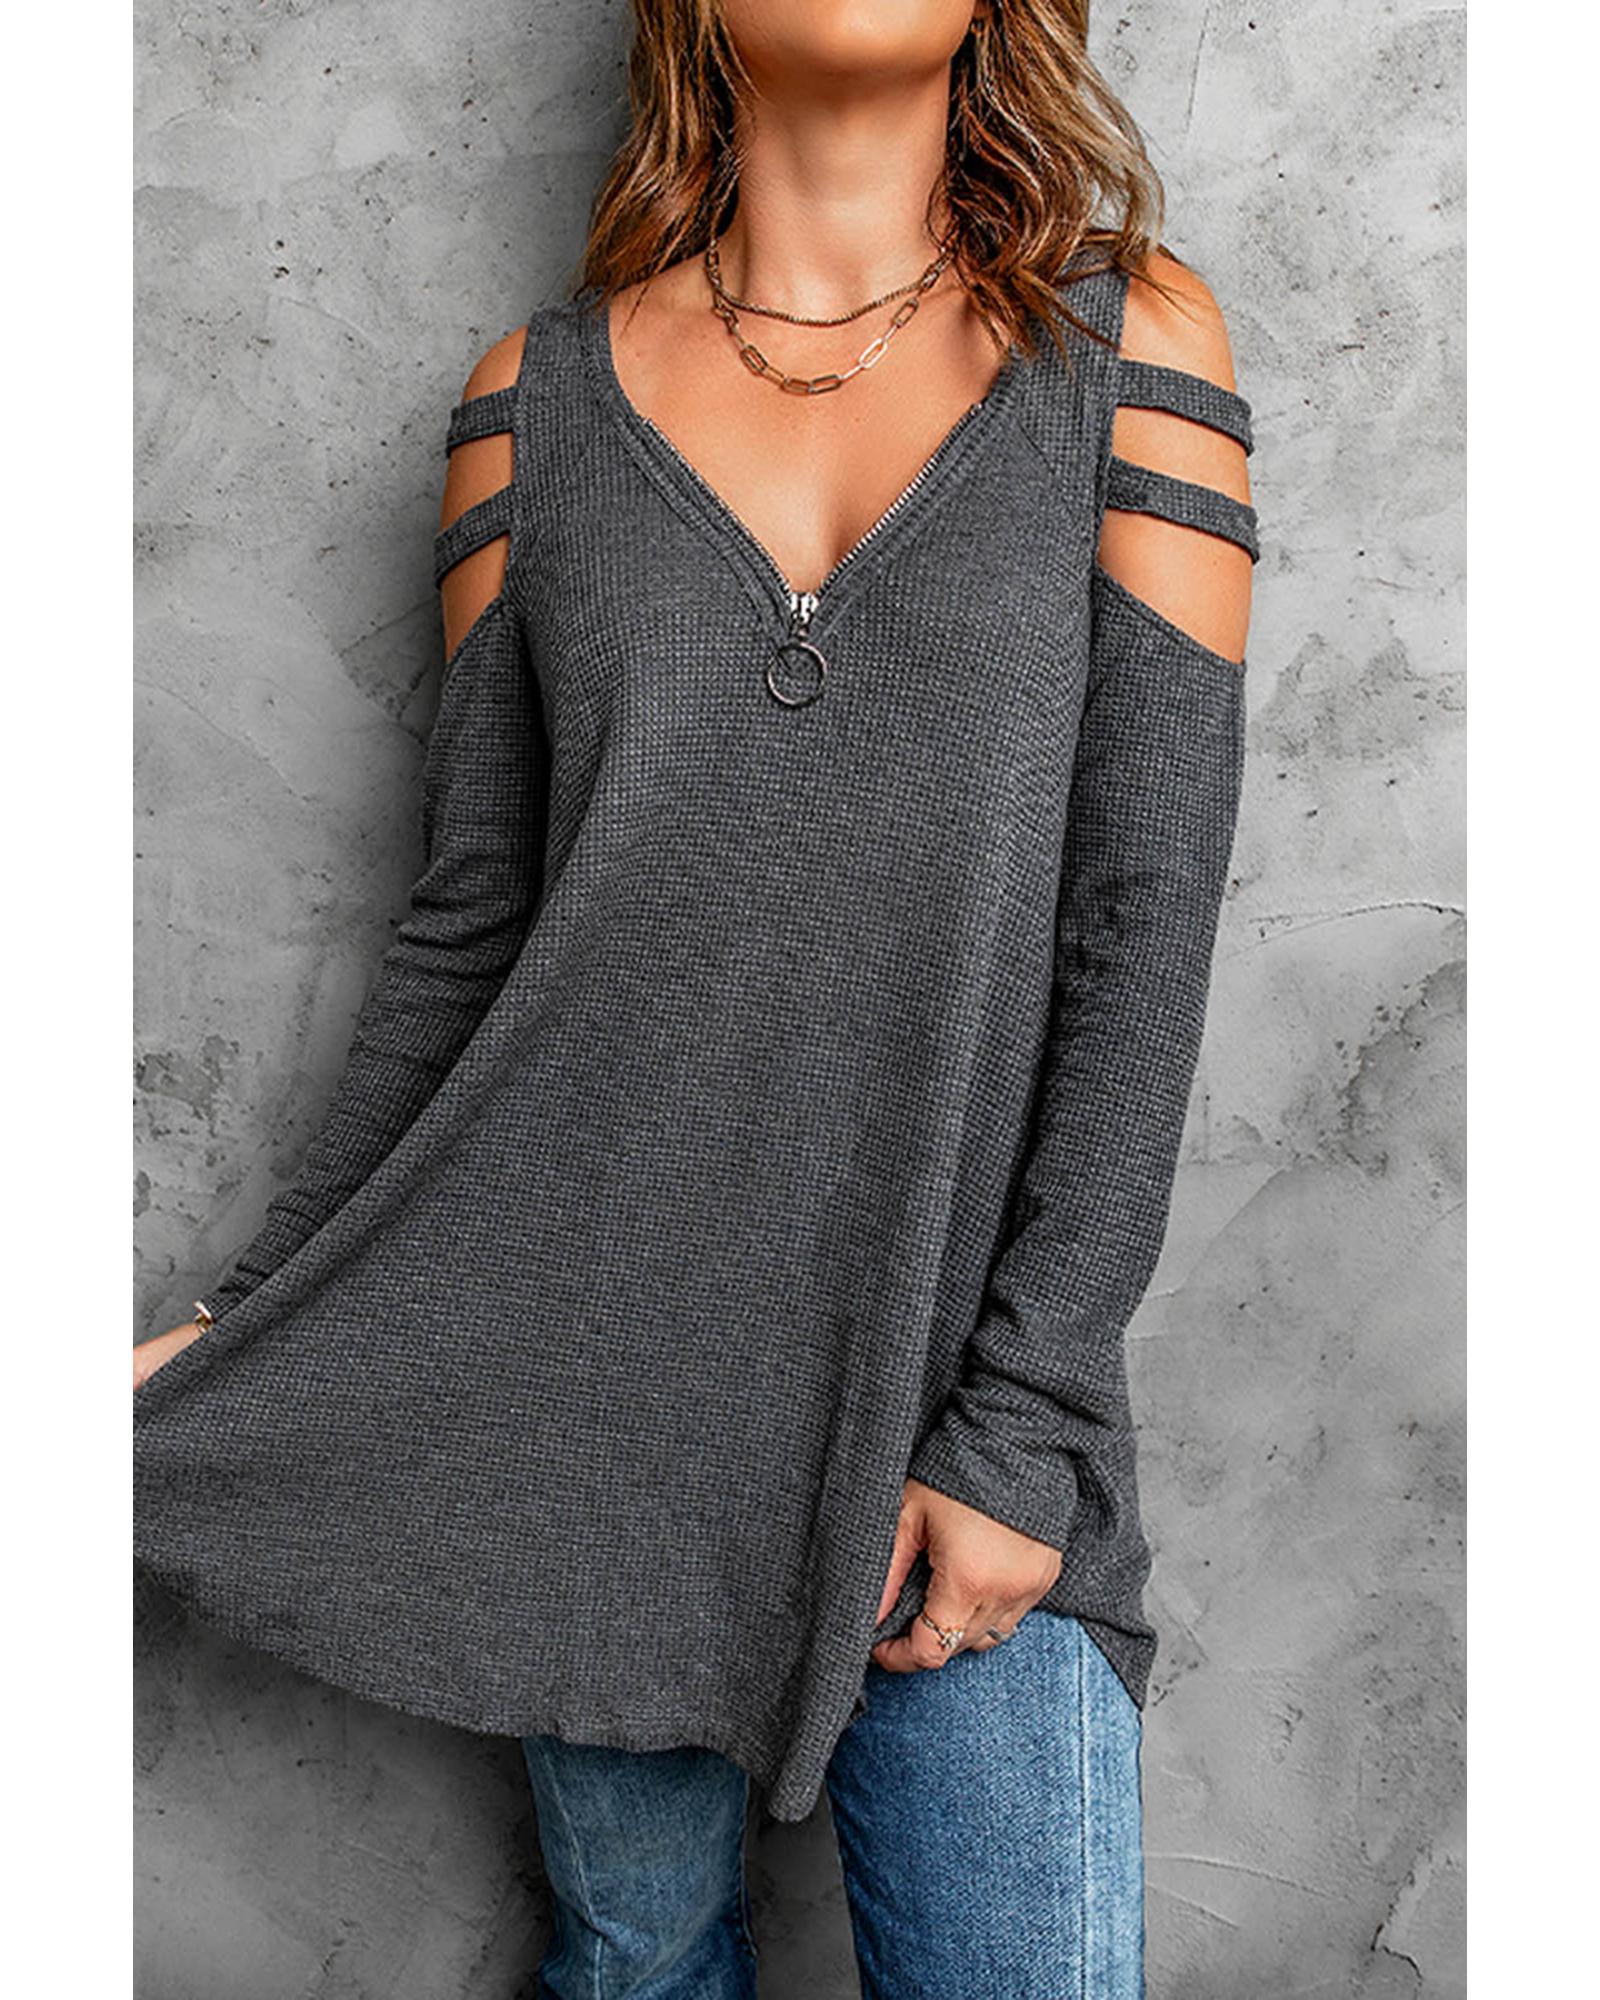 Cut-out Waffle Knit Long Sleeve Top - L